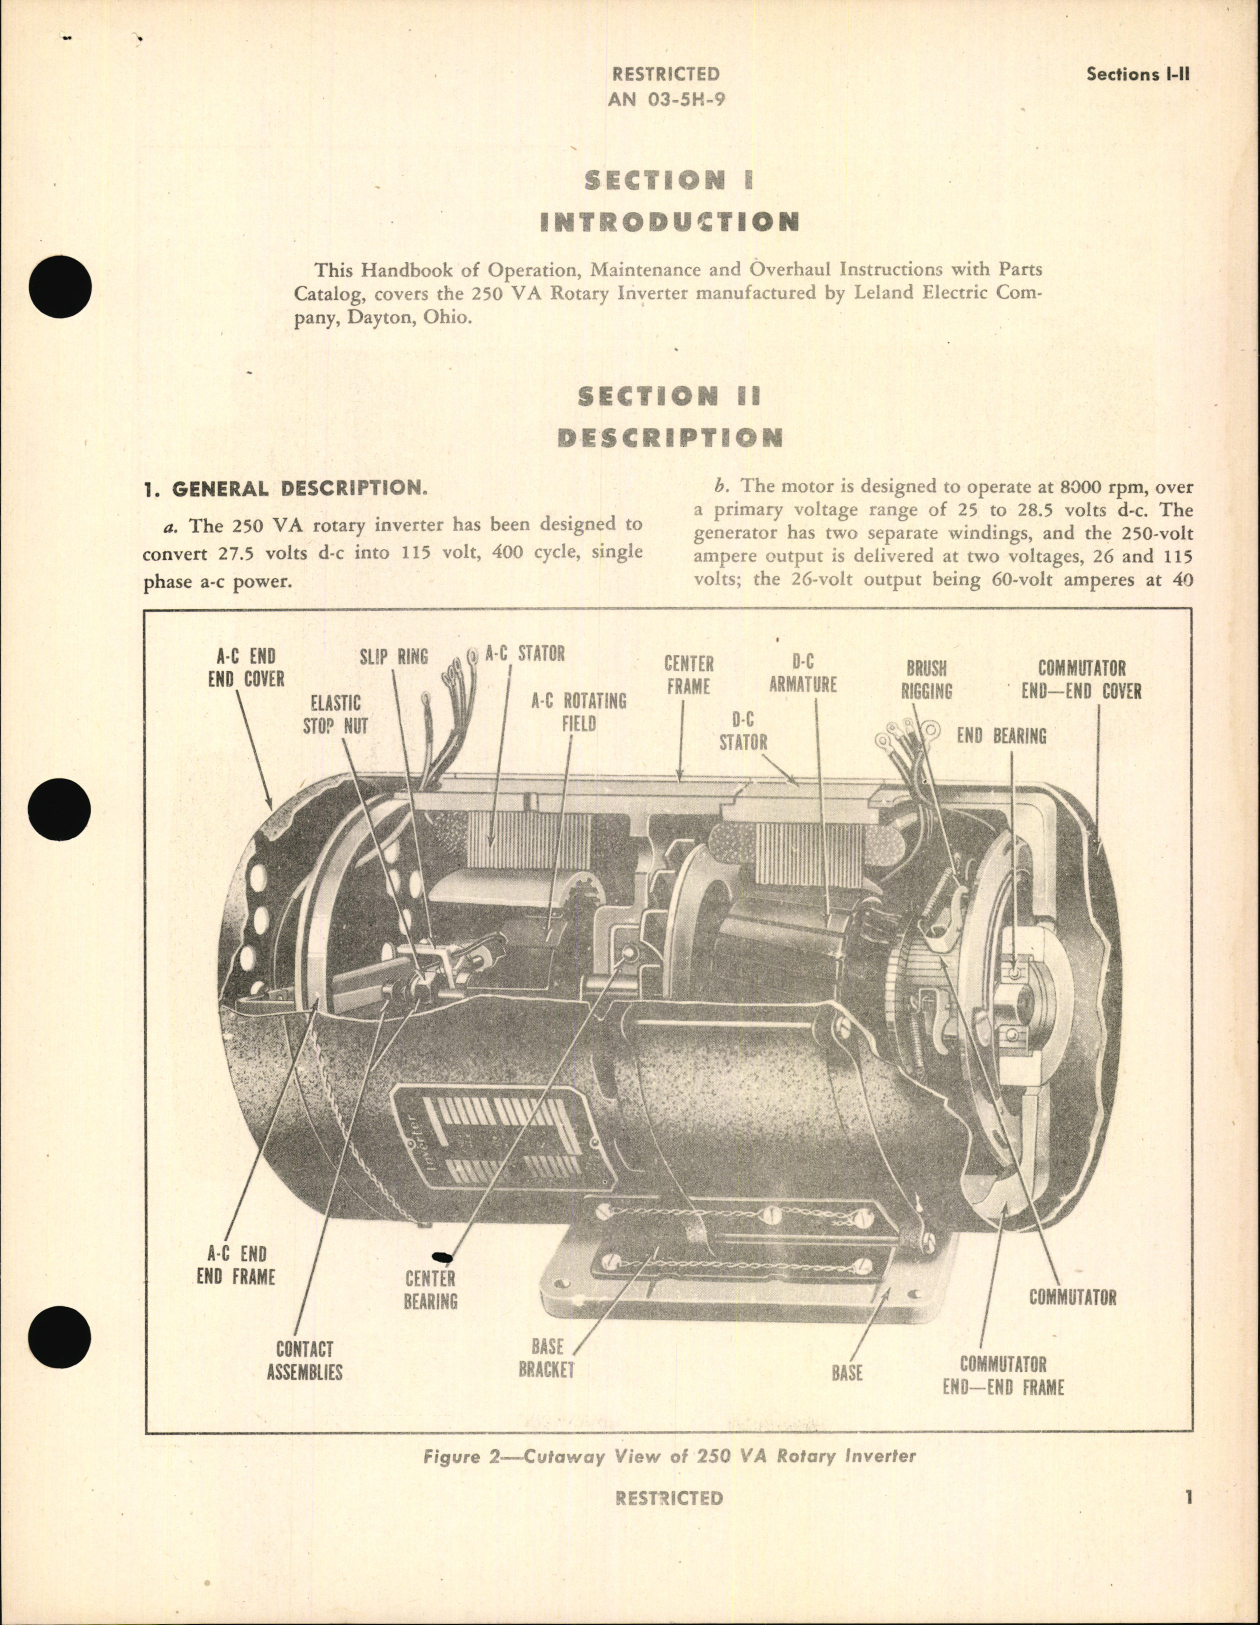 Sample page 5 from AirCorps Library document: Handbook of Instructions with Parts Catalog for 250 VA Rotary Inverter